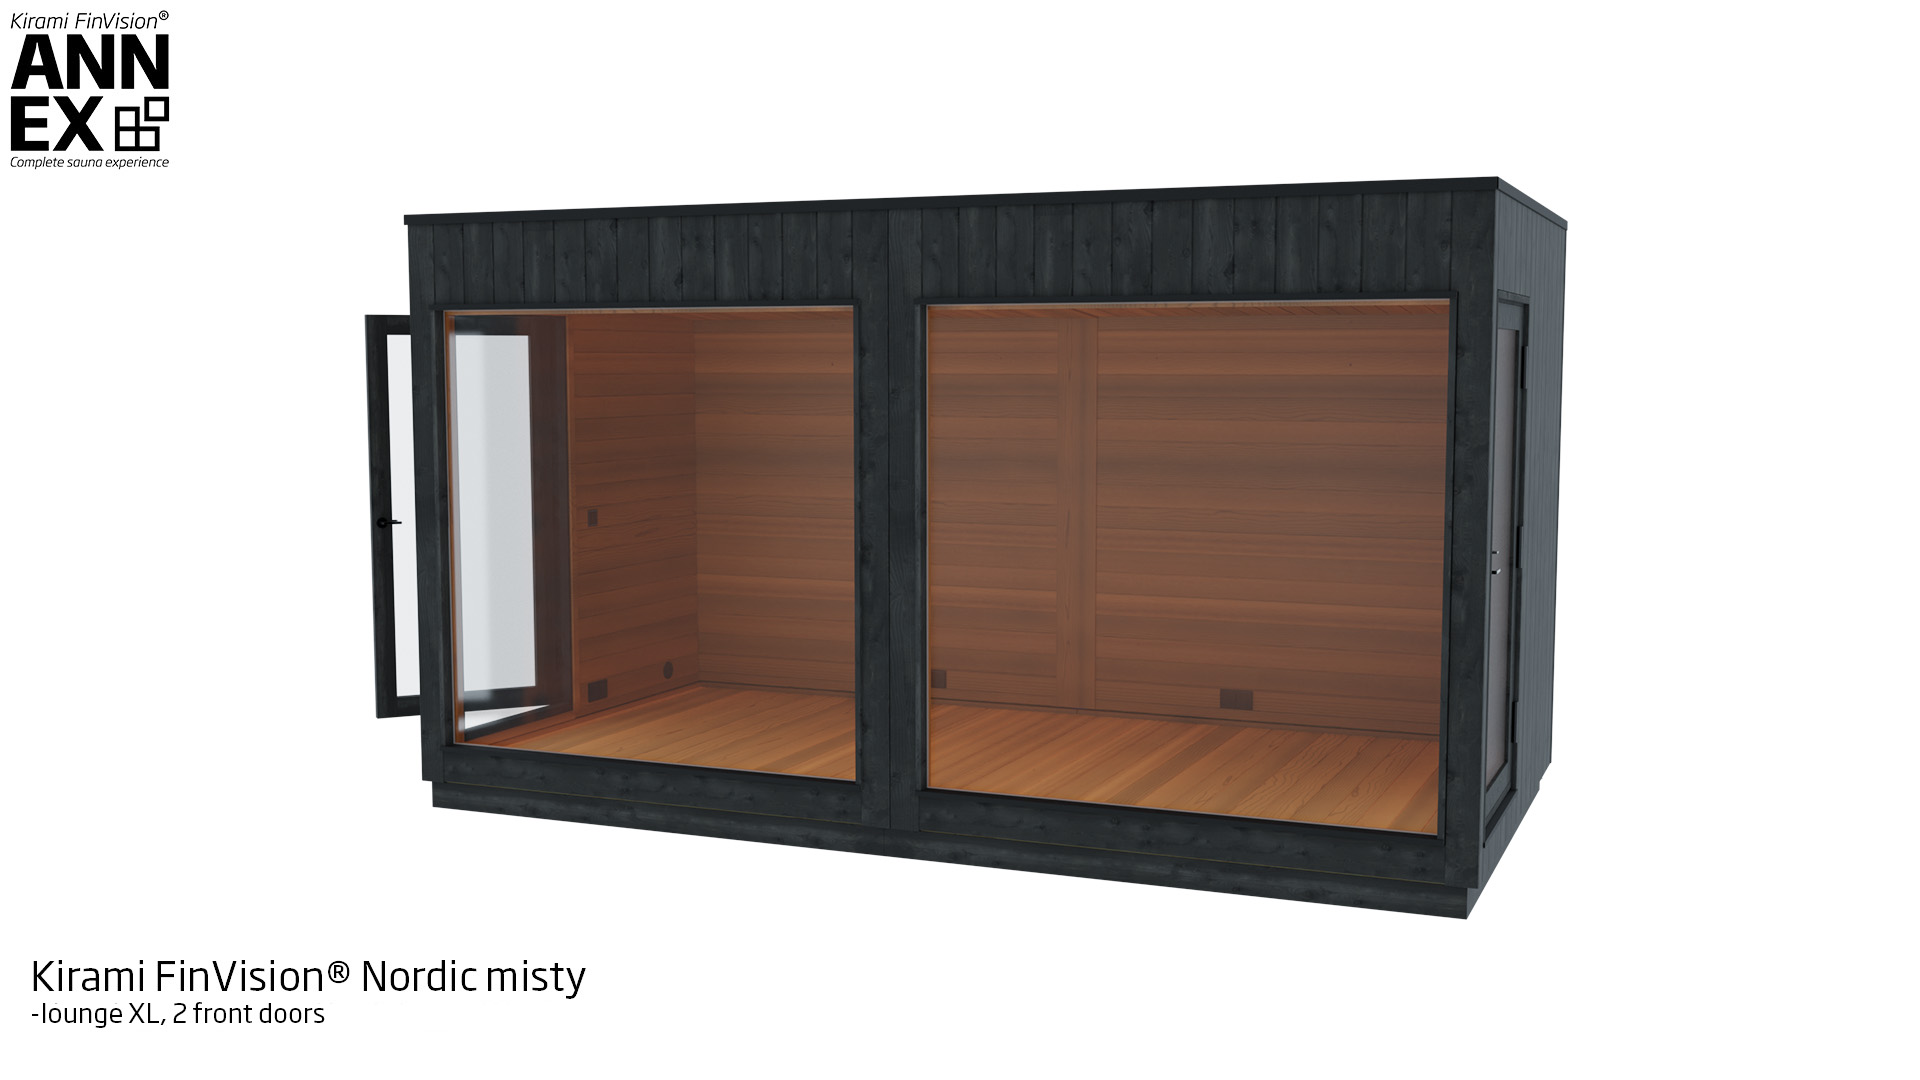 Kirami FinVision® -lounge XL Nordic misty with 2 front doors | Kirami FinVision® Annex